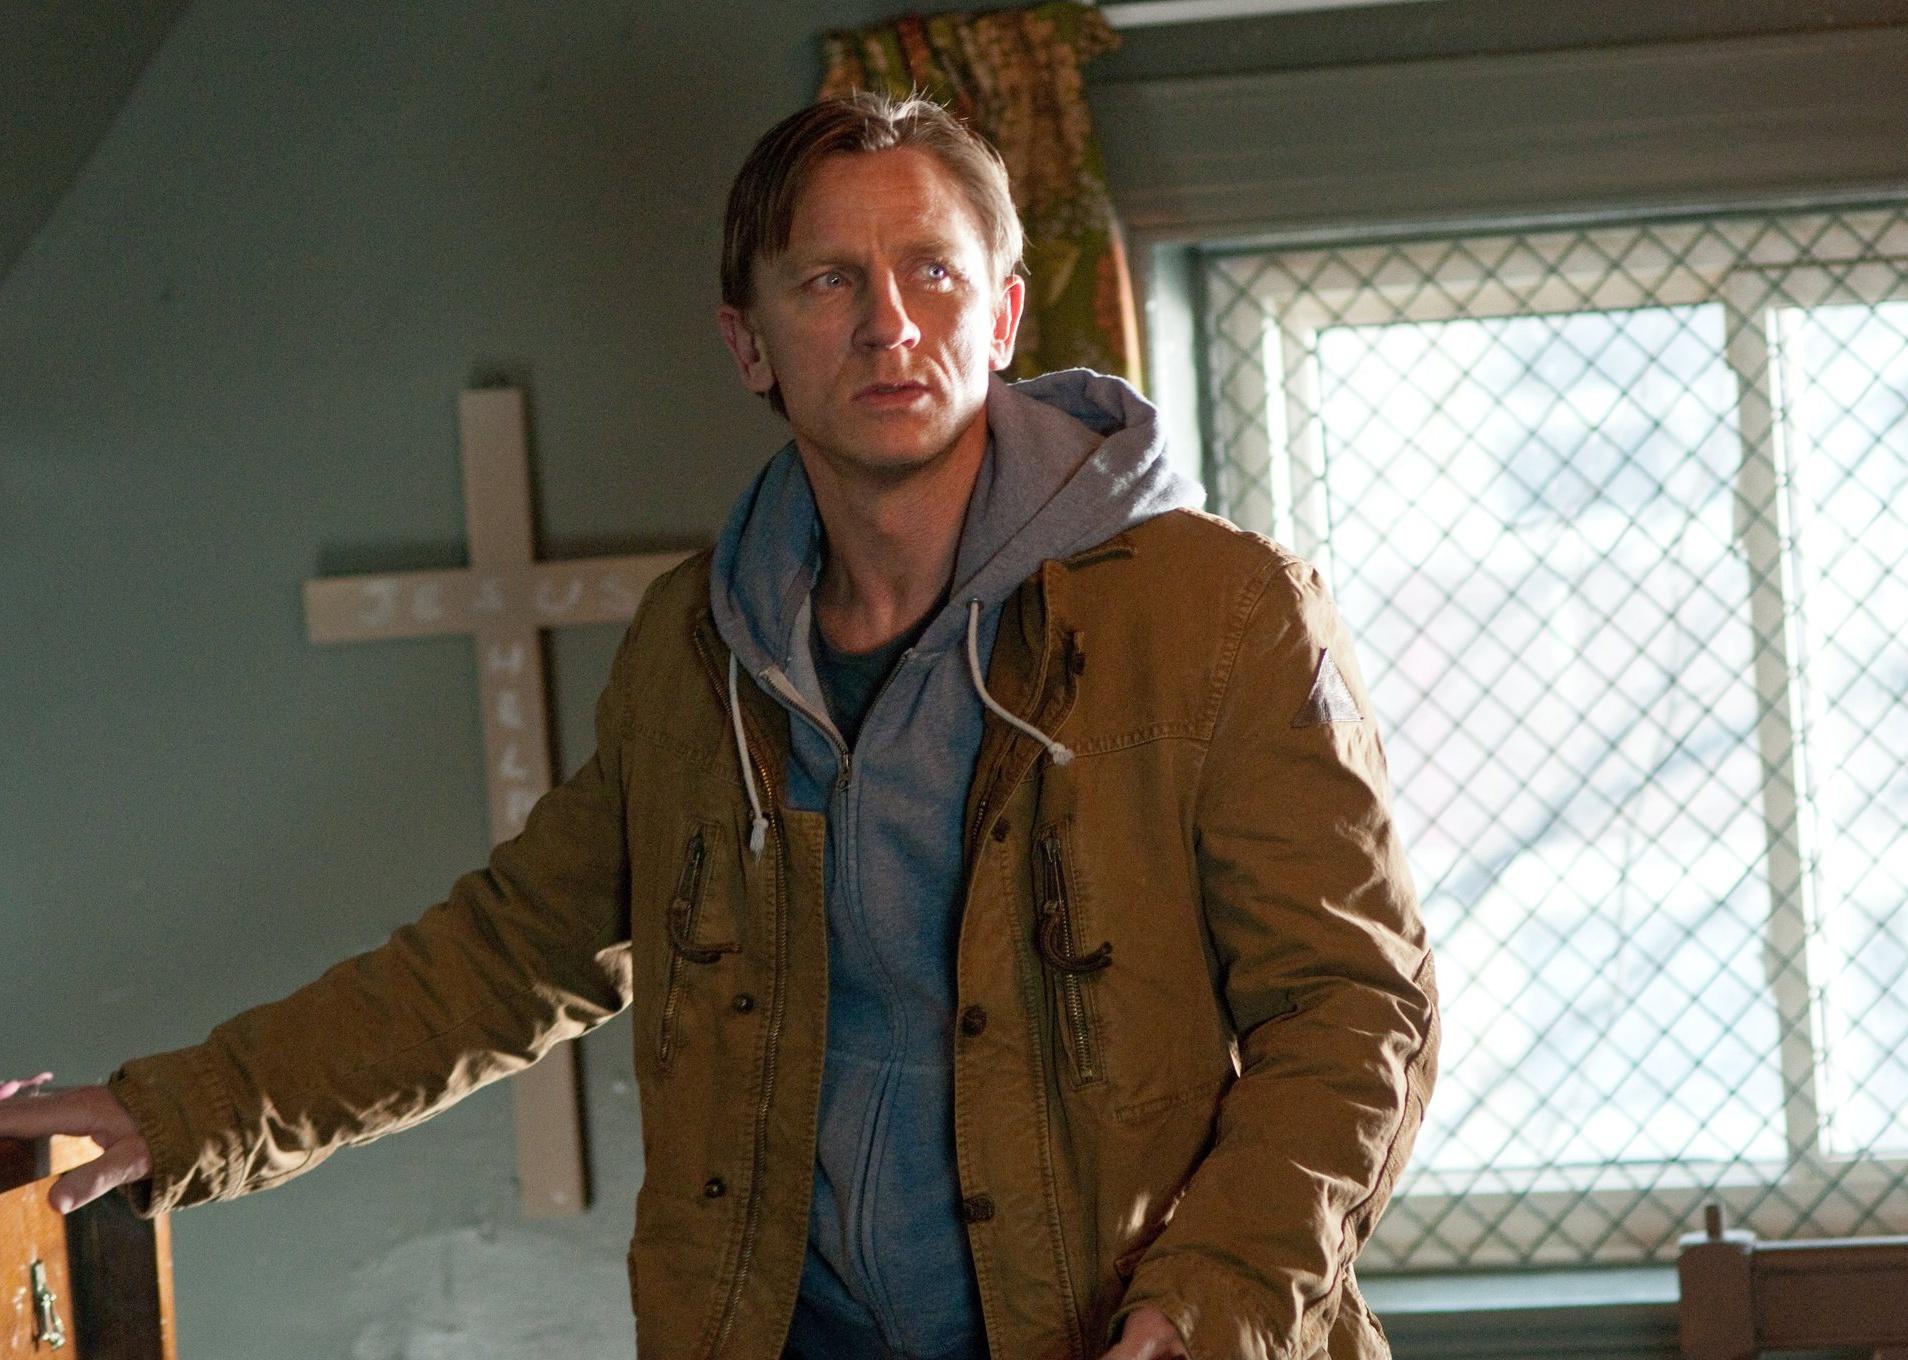 Daniel Craig in a hoodie and jacket in front of a cross.